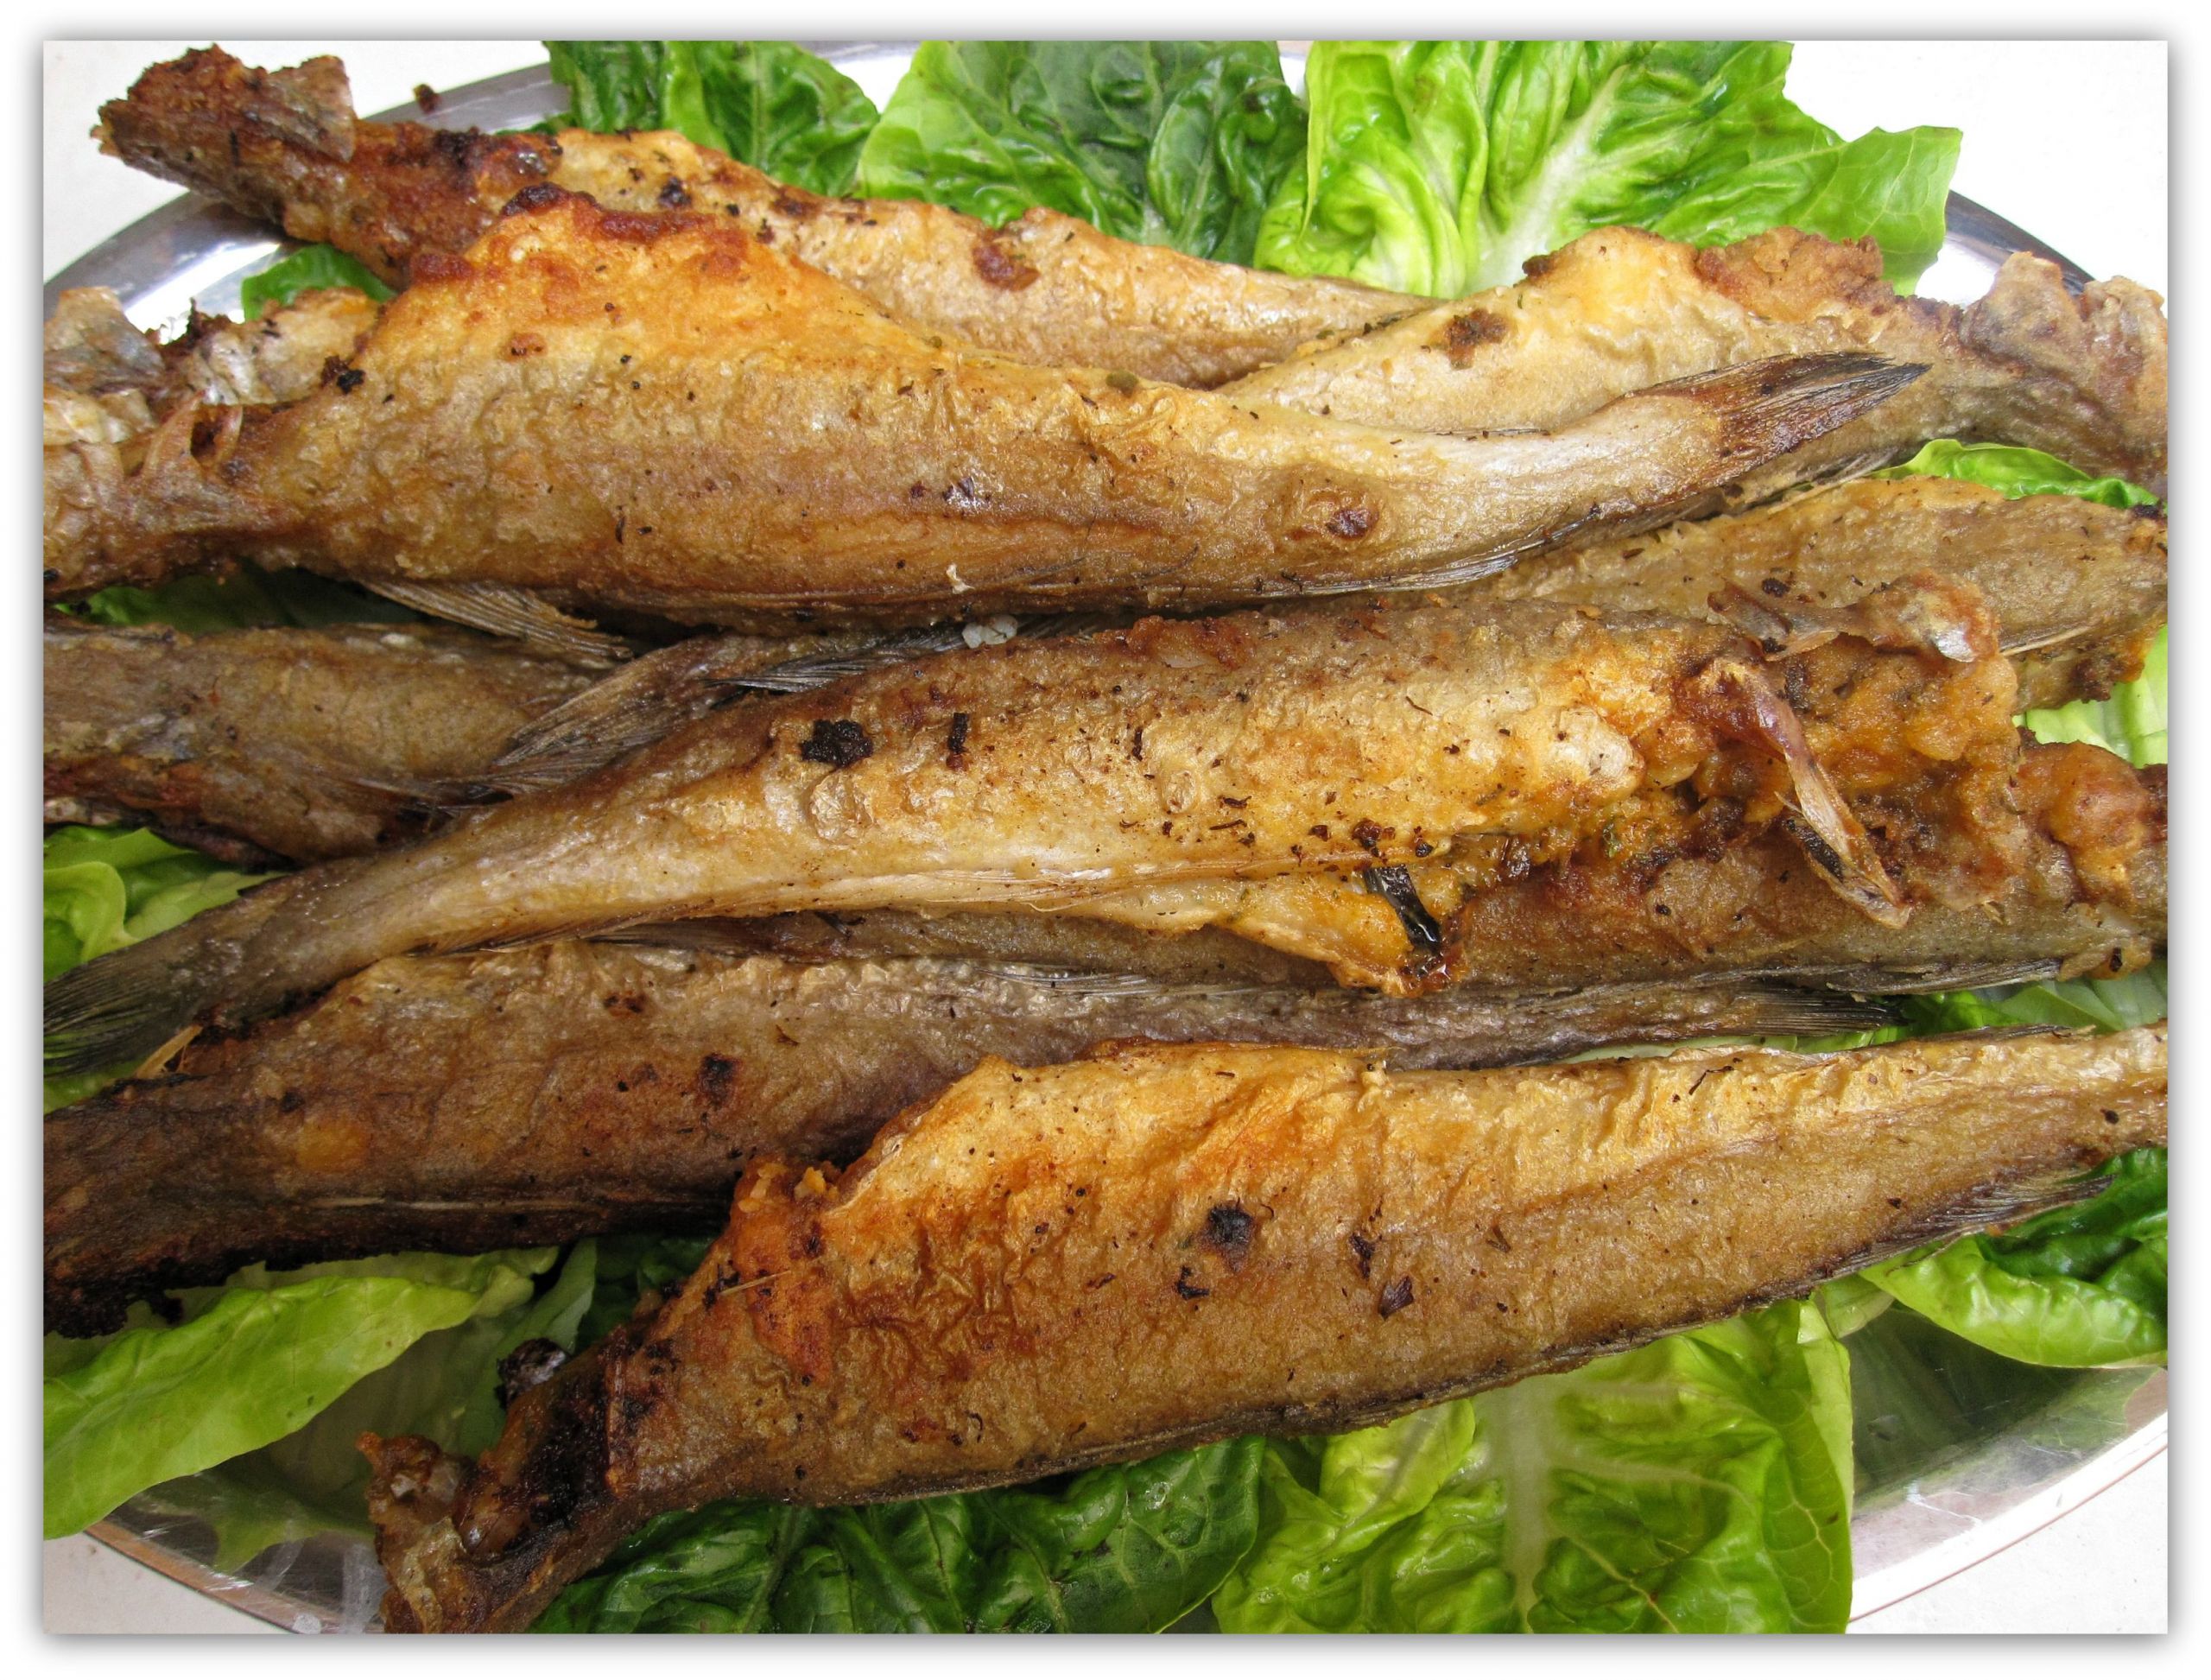 Recipes For Whiting Fish
 Moroccan Fried Fish Recipe With Hake or Whiting